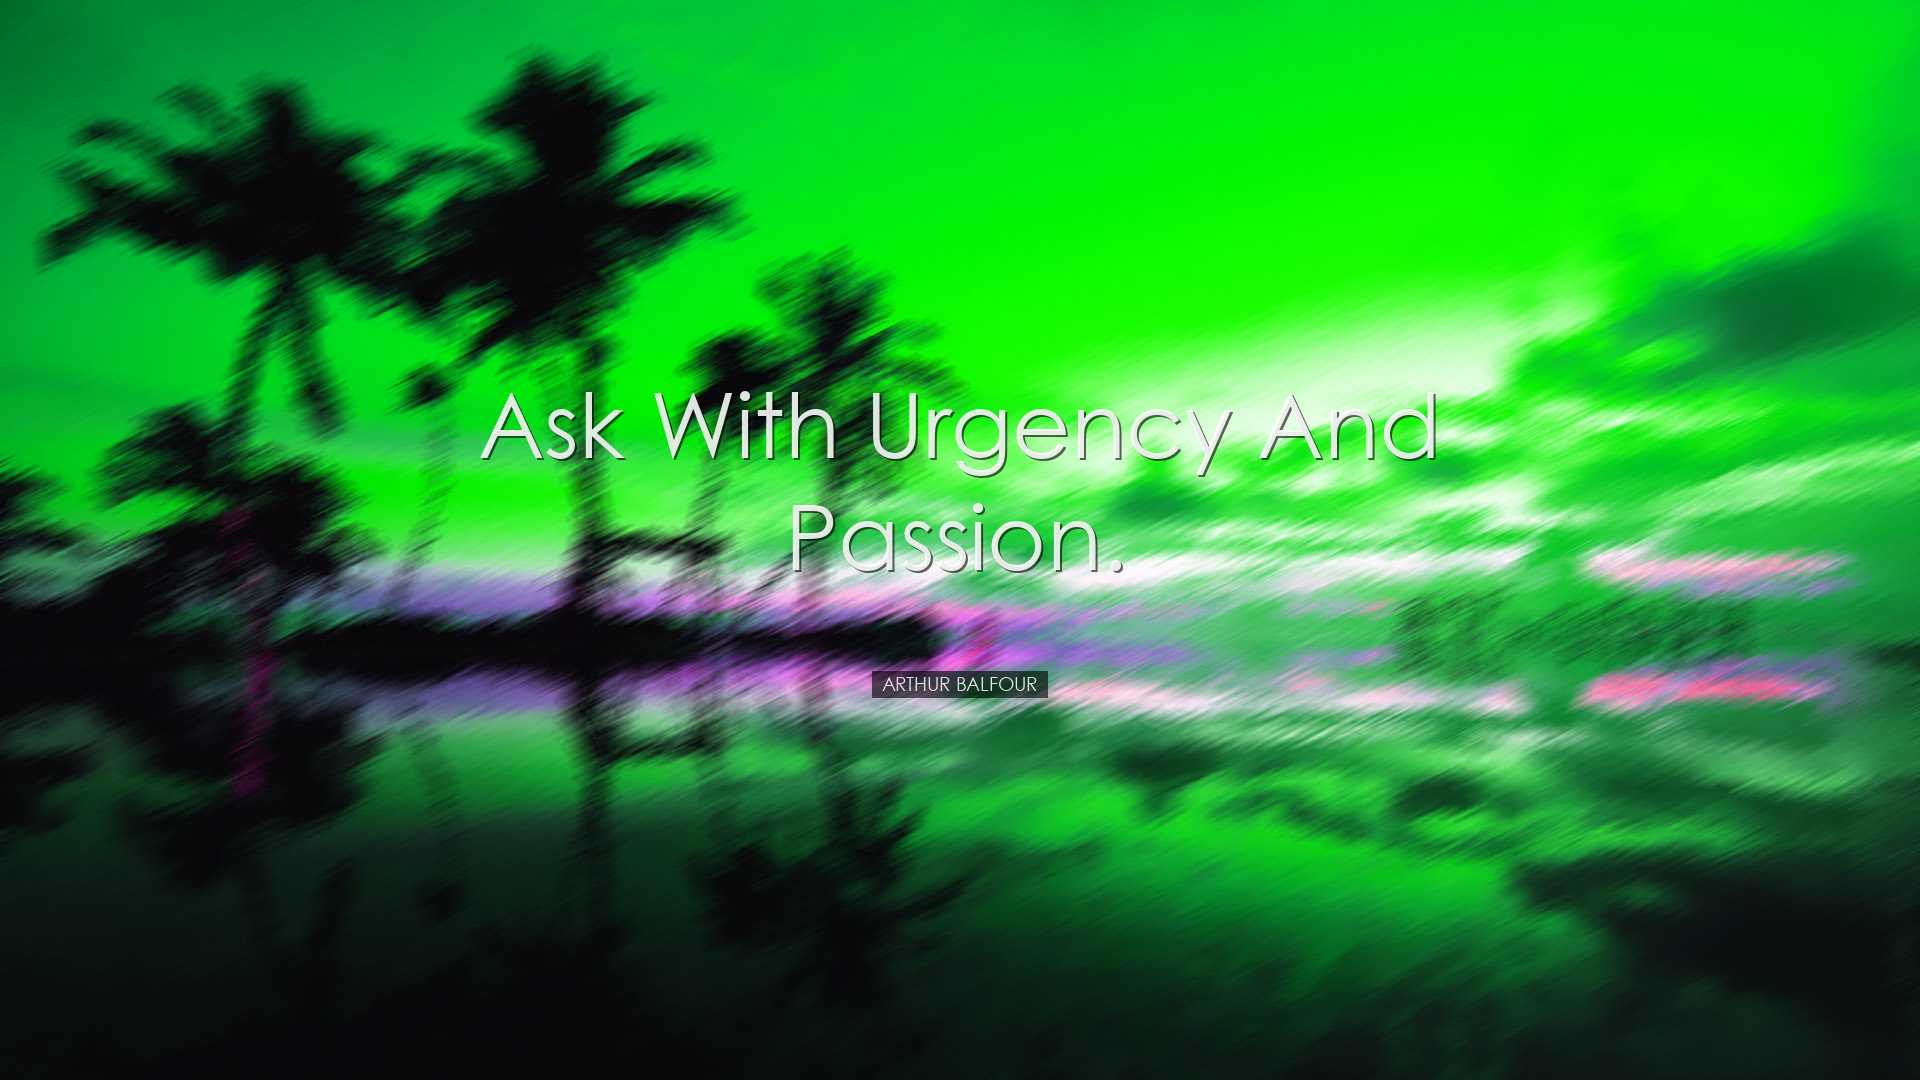 Ask with urgency and passion. - Arthur Balfour